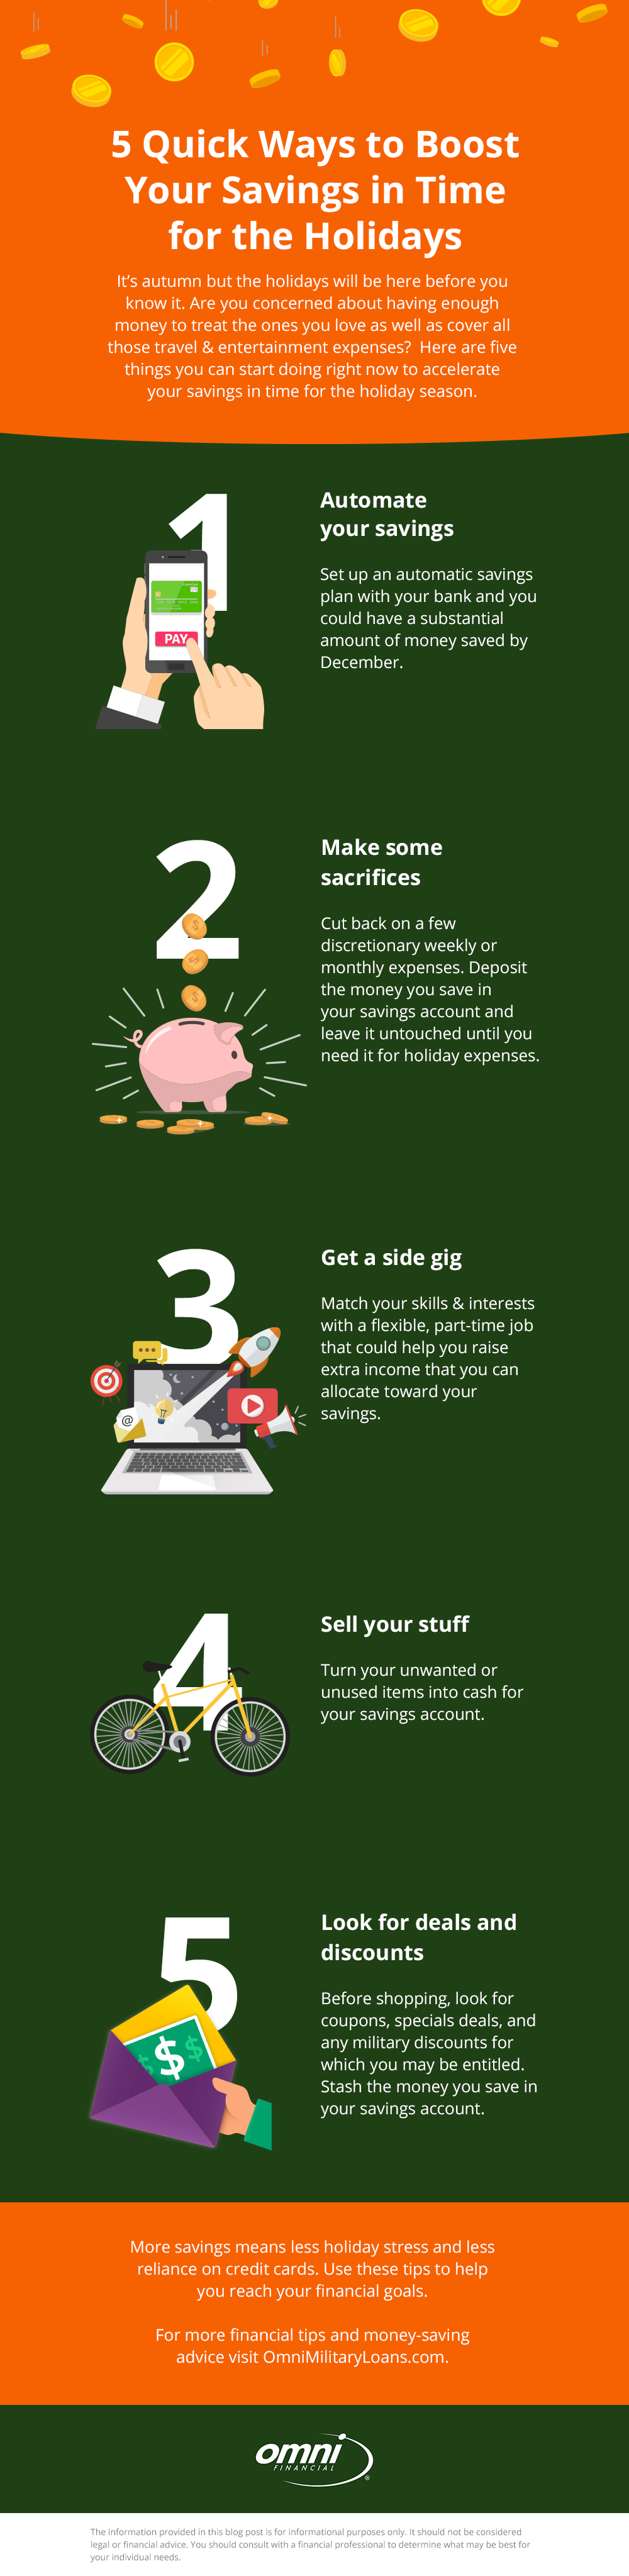 5 Quick Ways to Boost Your Savings in Time for the Holidays Infographic